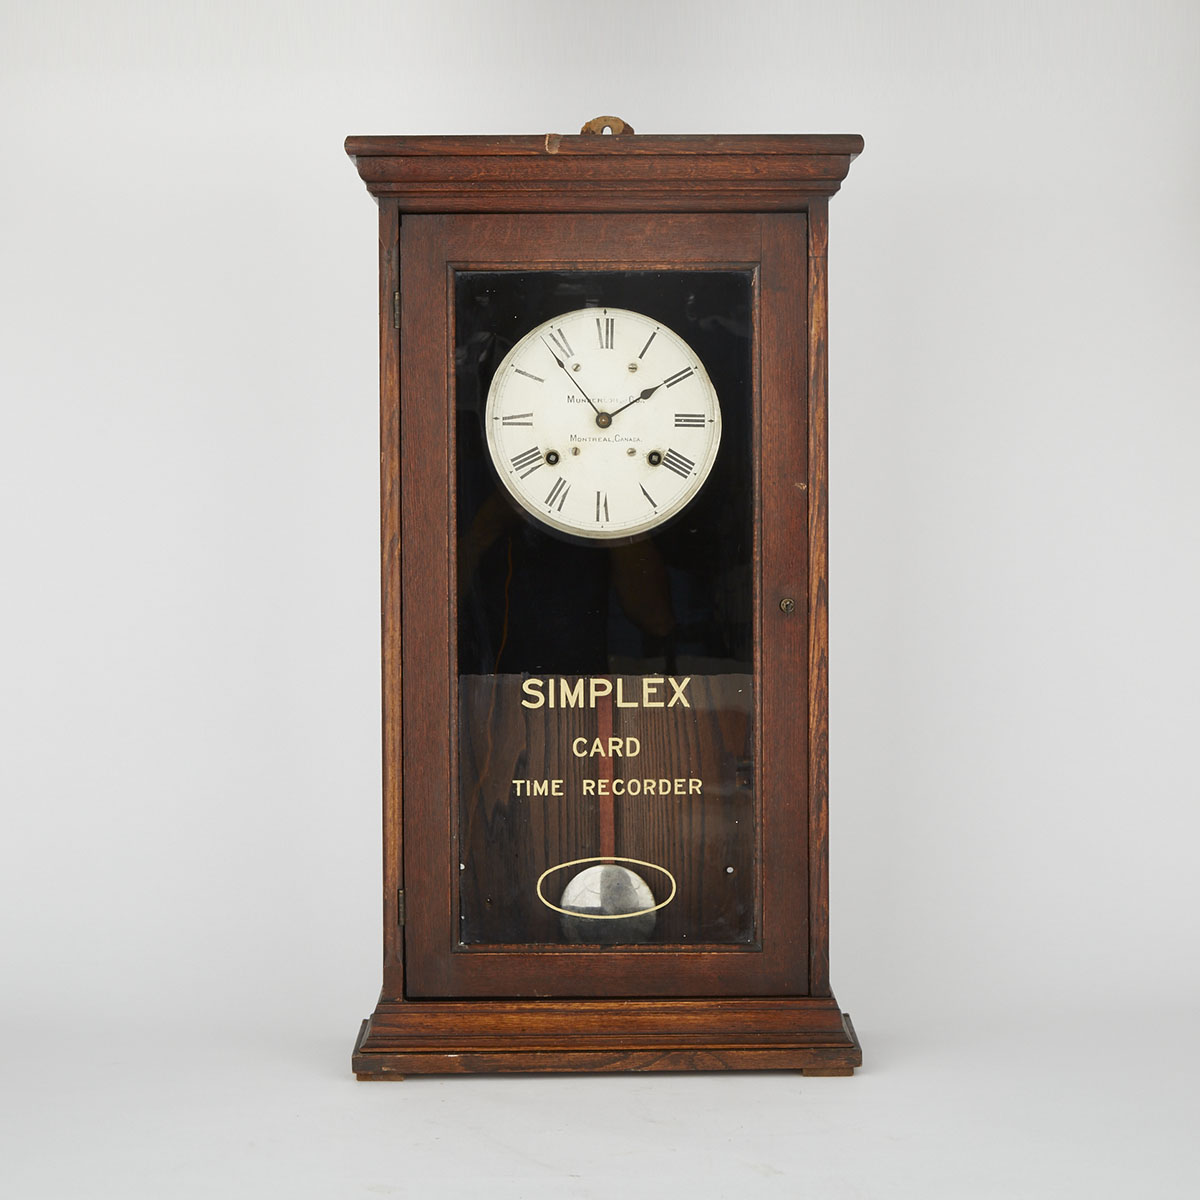 Simplex Card Time Recorder Clock for Munderloh and Co., Montreal, c.1909